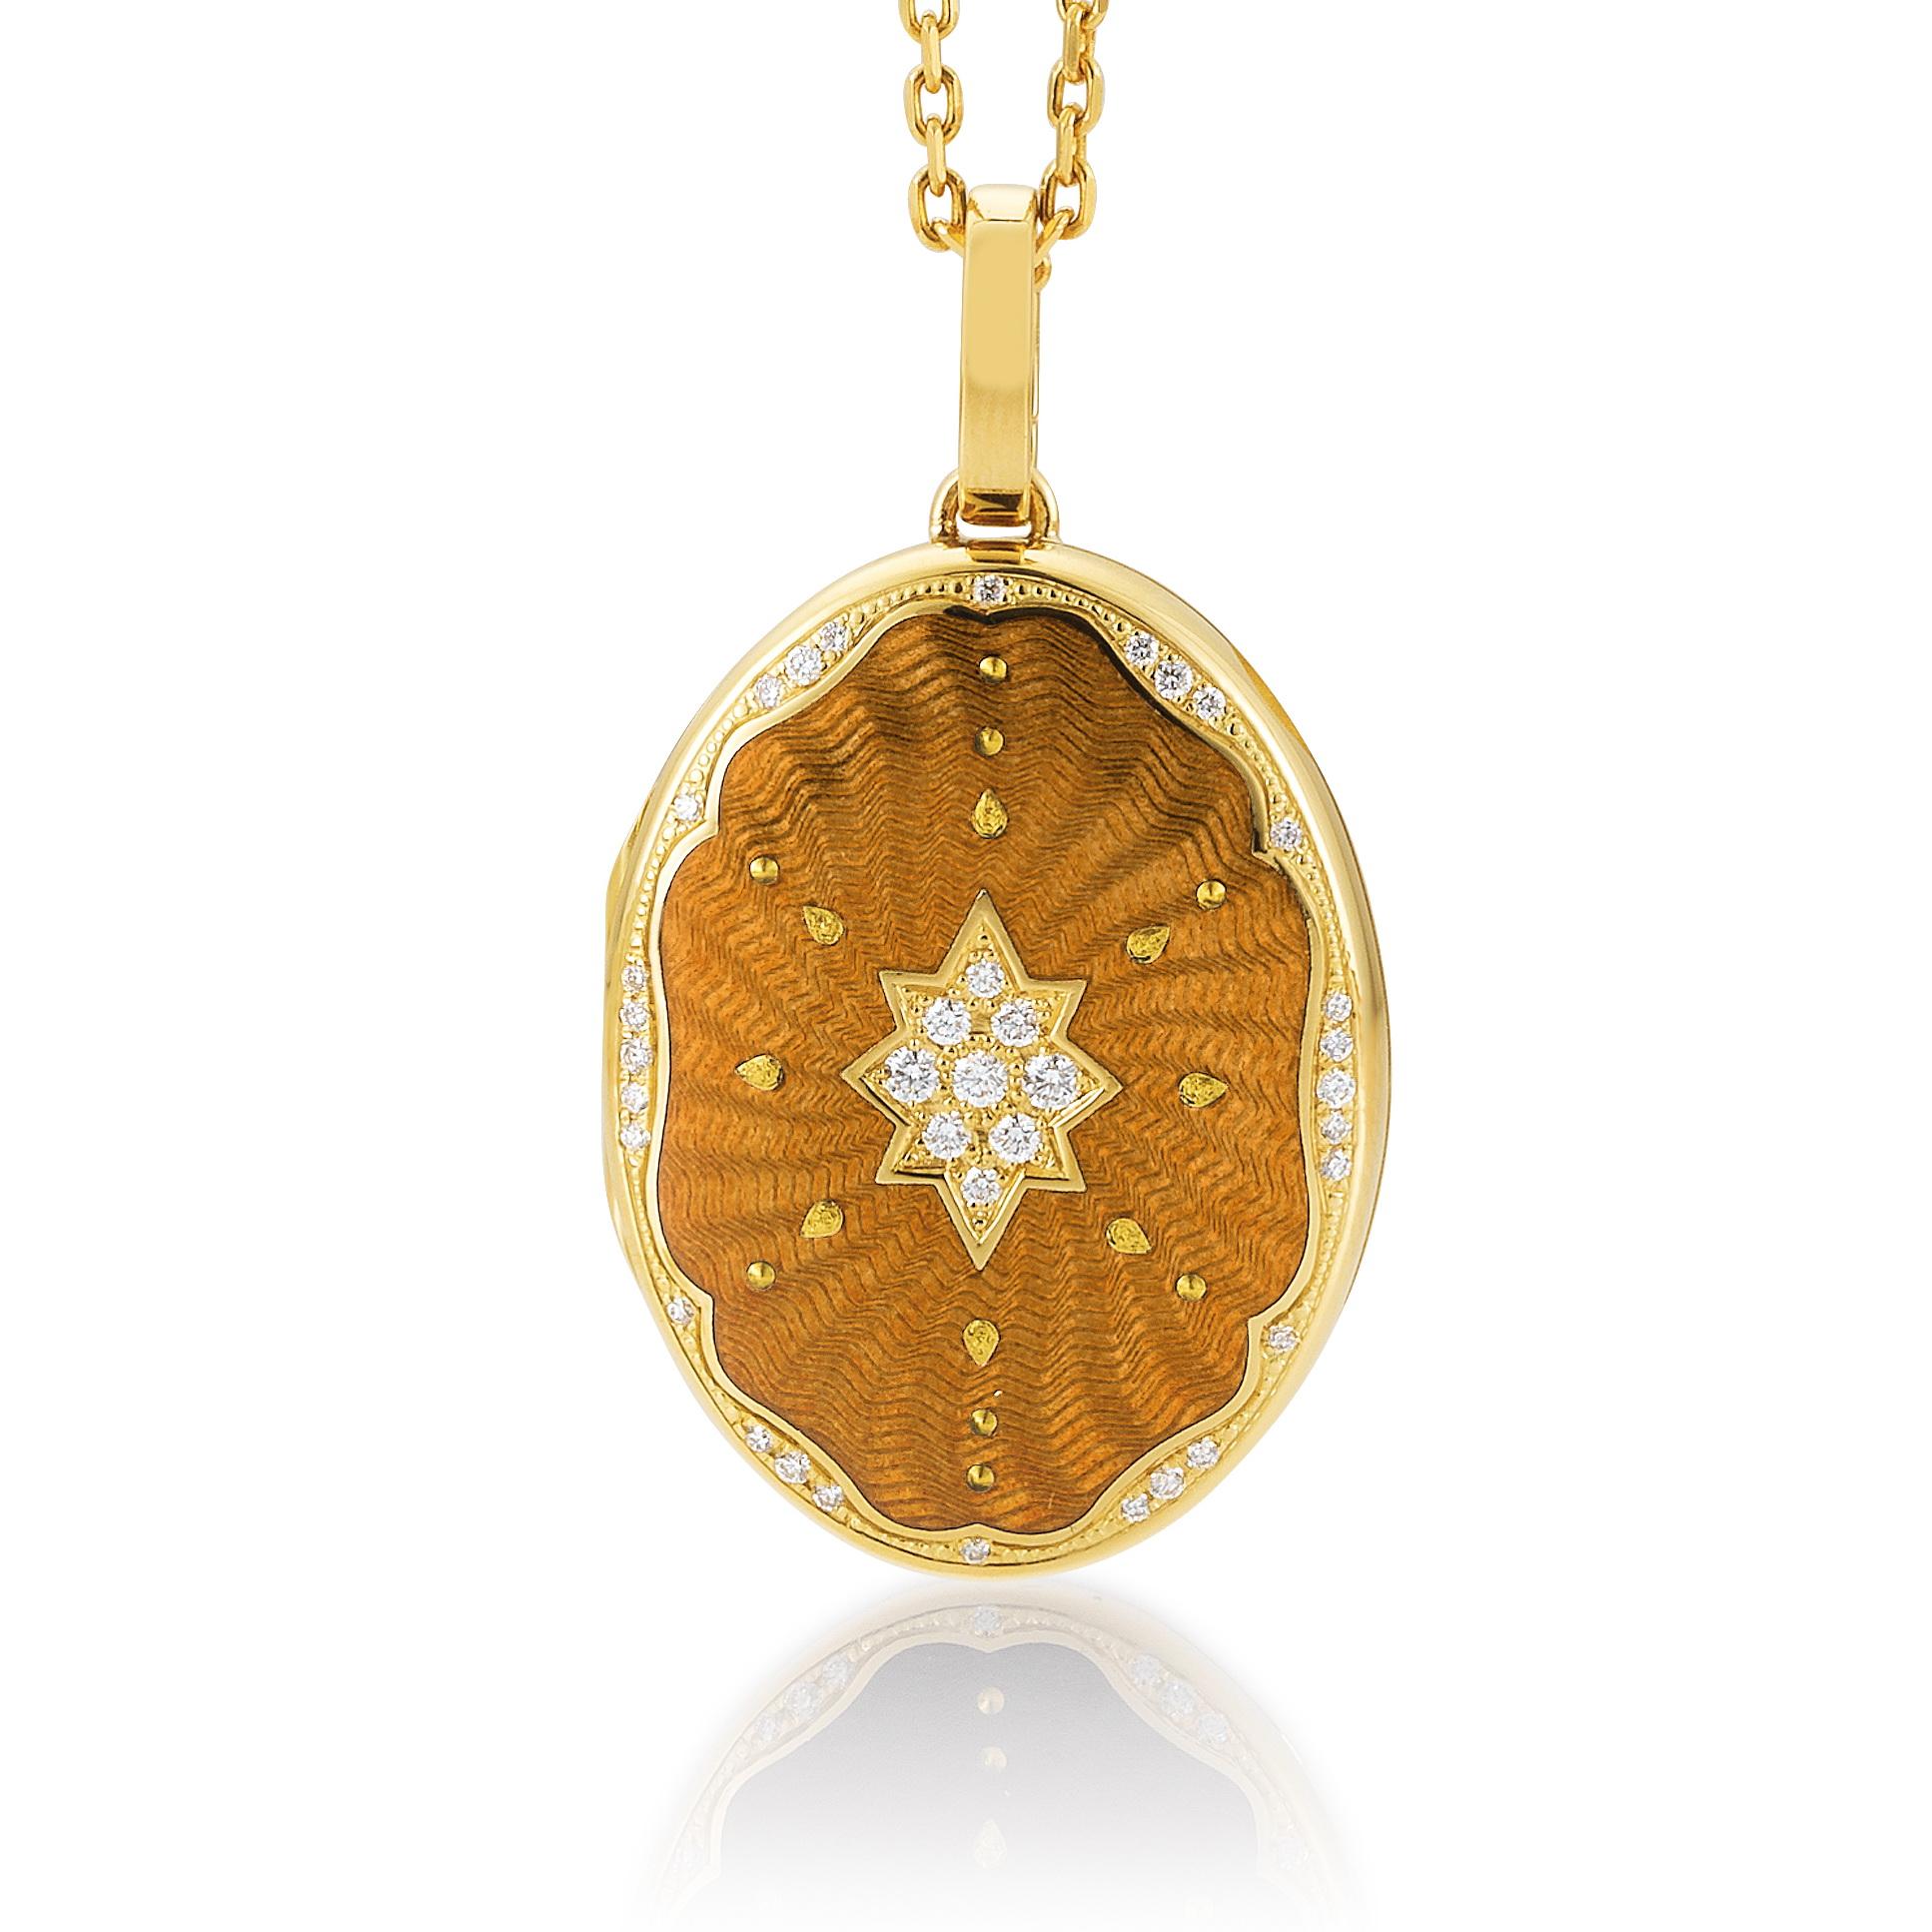 Victor Mayer oval locket pendant 18k yellow gold, Victoria collection, translucent autumn yellow vitreous enamel, gold paillons, 37 diamonds, total 0.29 ct, G VS, brilliant cut, measurements app. 25 mm x 35 mm

About the creator Victor Mayer
Victor